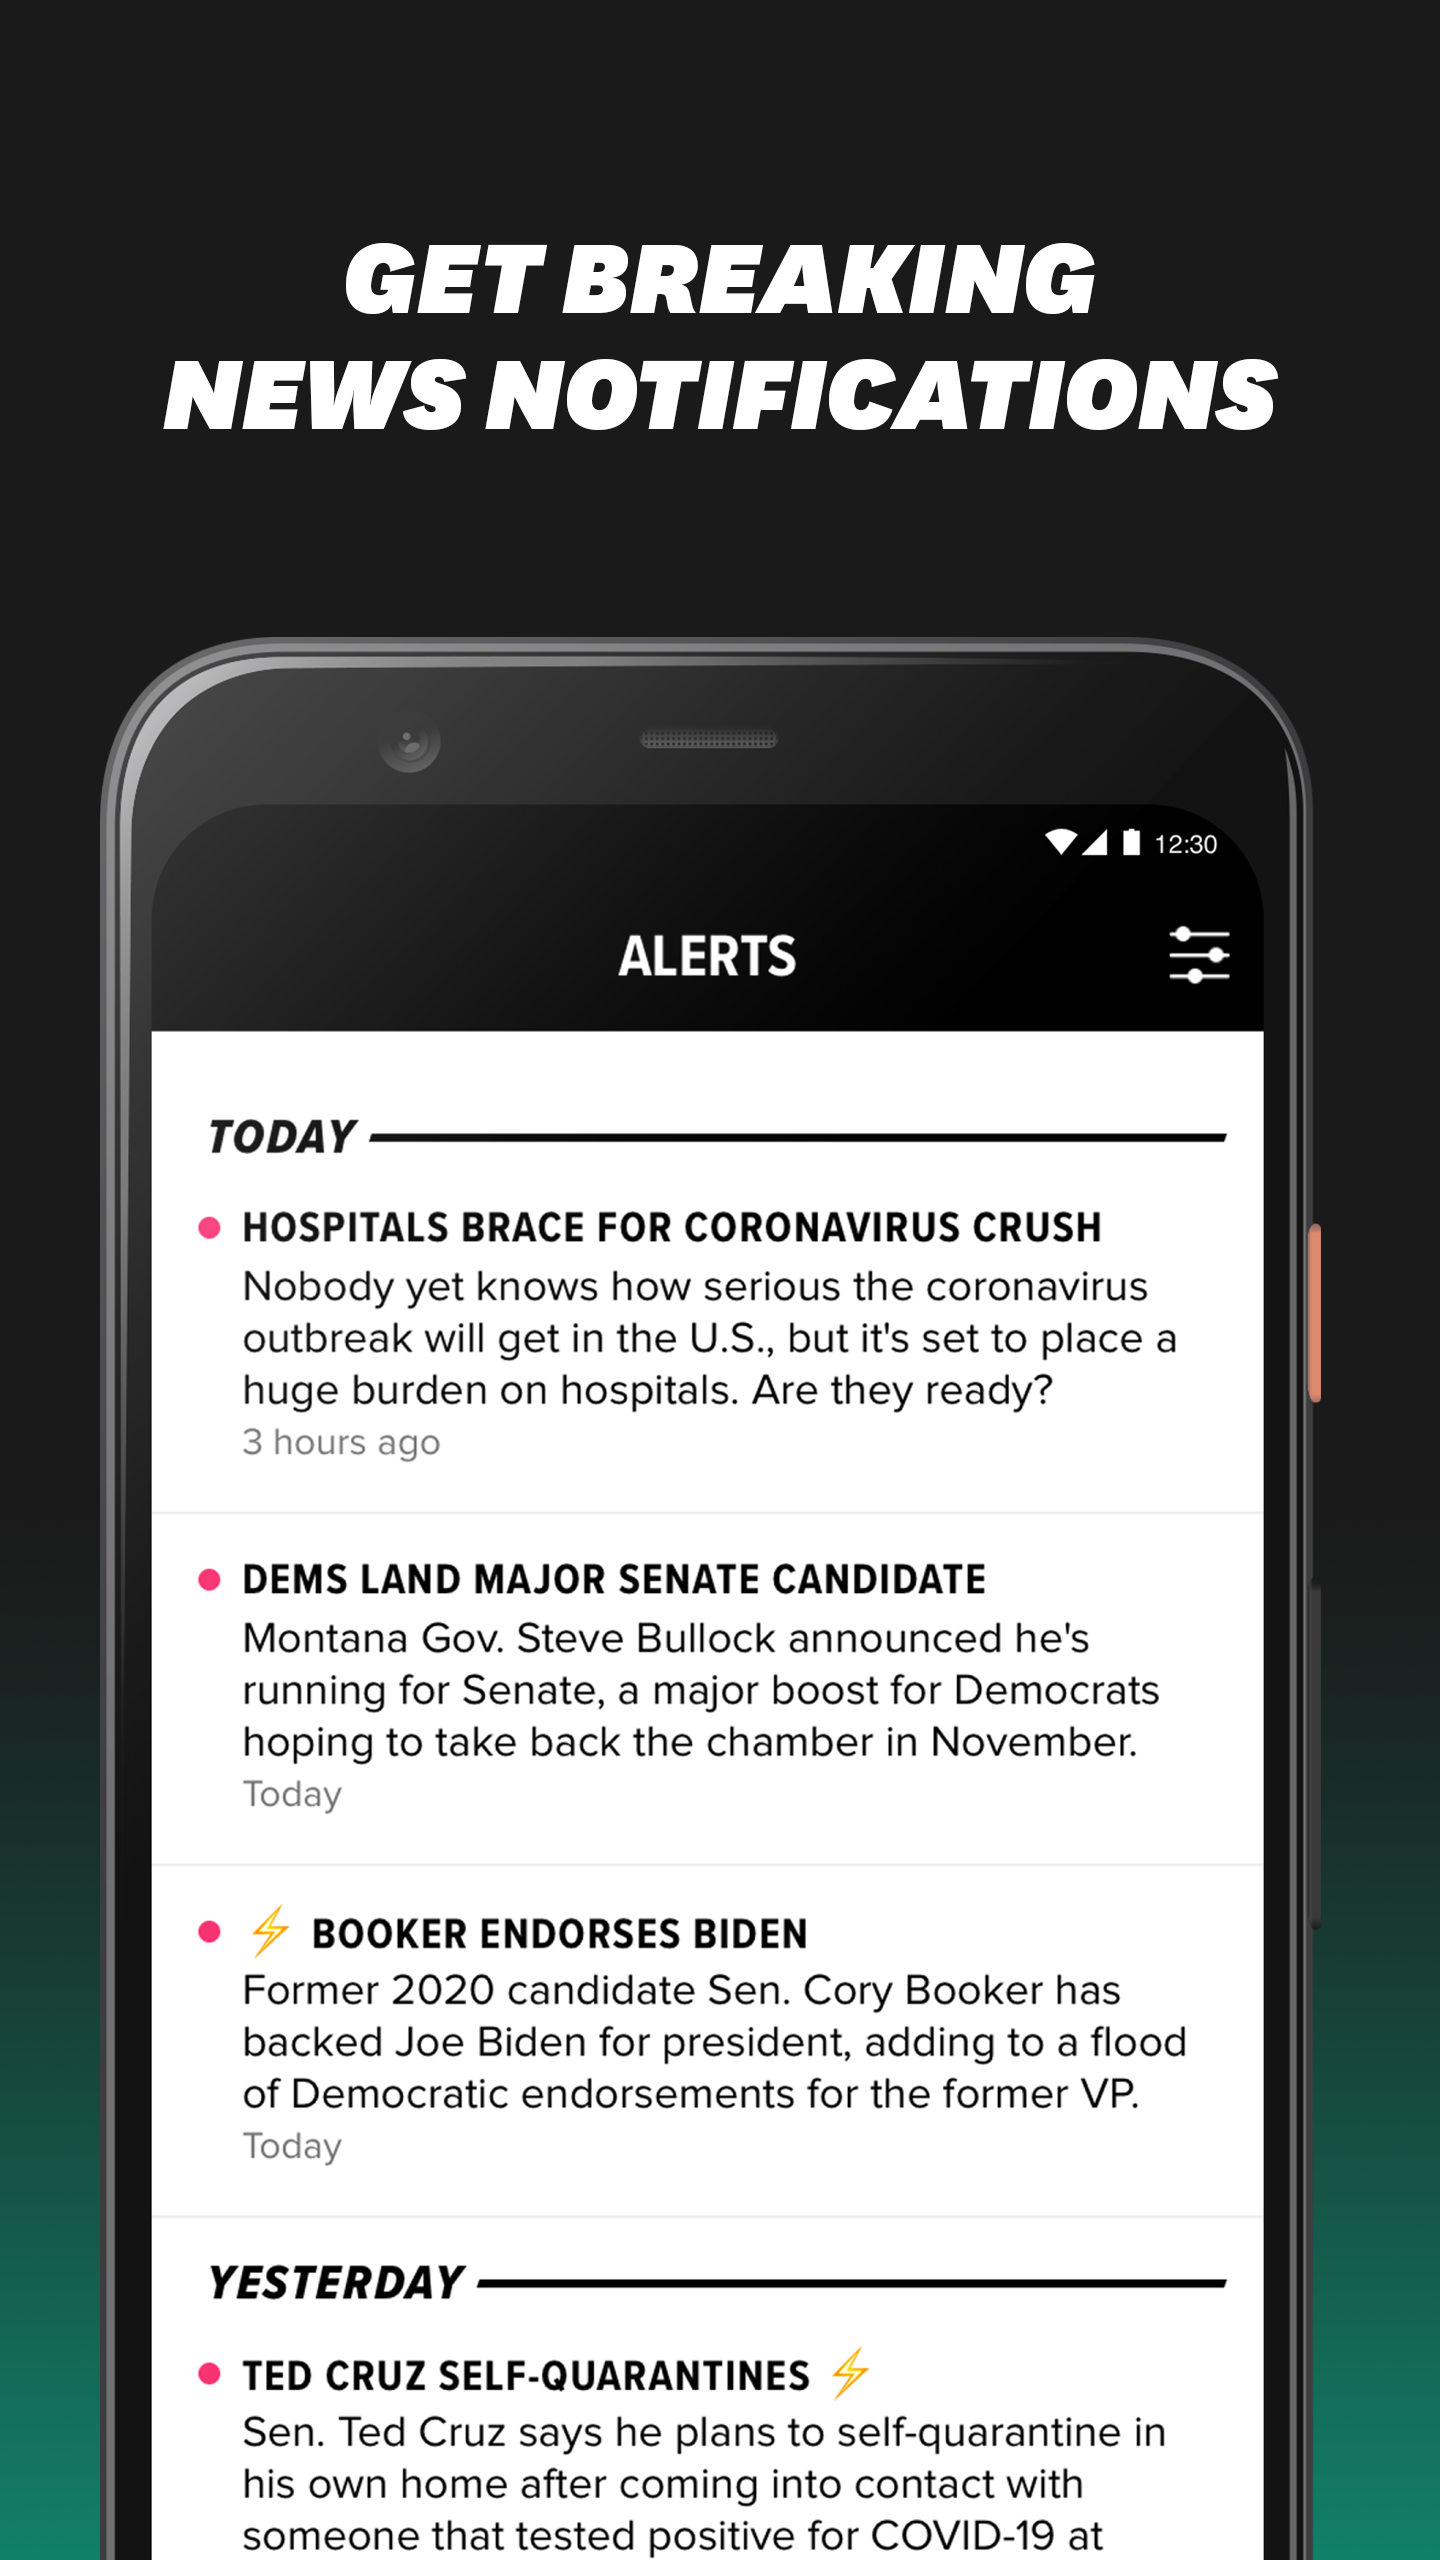 Android application HuffPost - Daily Breaking News & Politics screenshort